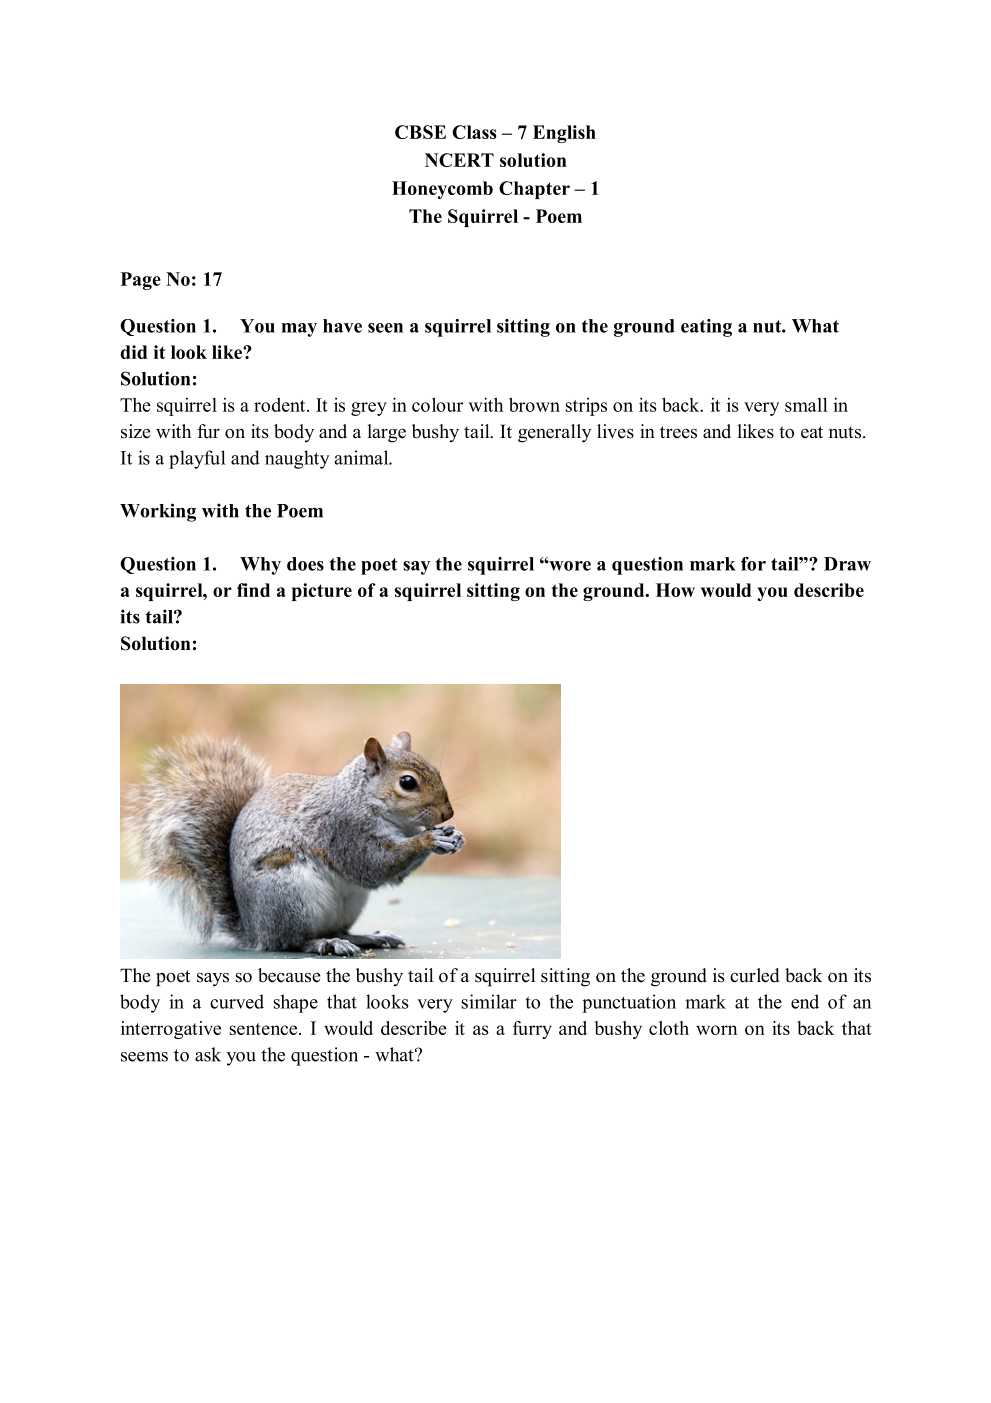 NCERT Solutions For Class 7 English Honeycomb Poem Chapter 1 The Squirrel